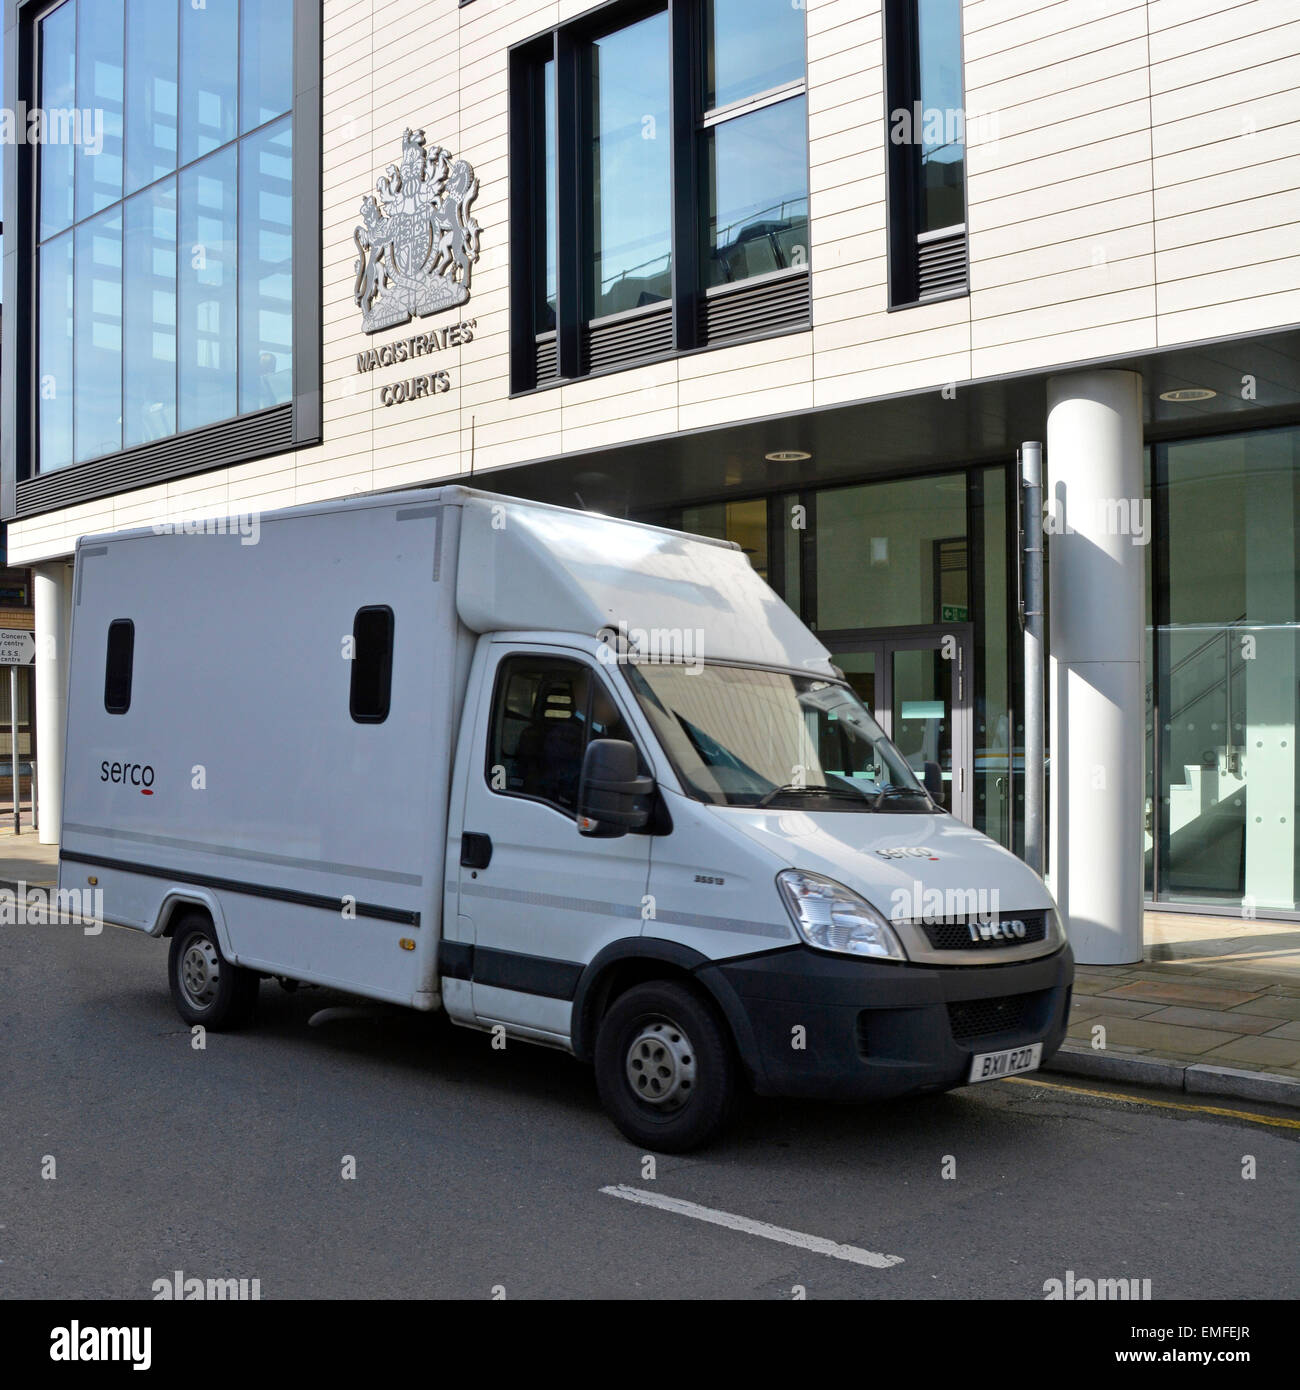 Chelmsford Magistrates Court prisoner transportation van operated by Serco outside courthouse building Stock Photo